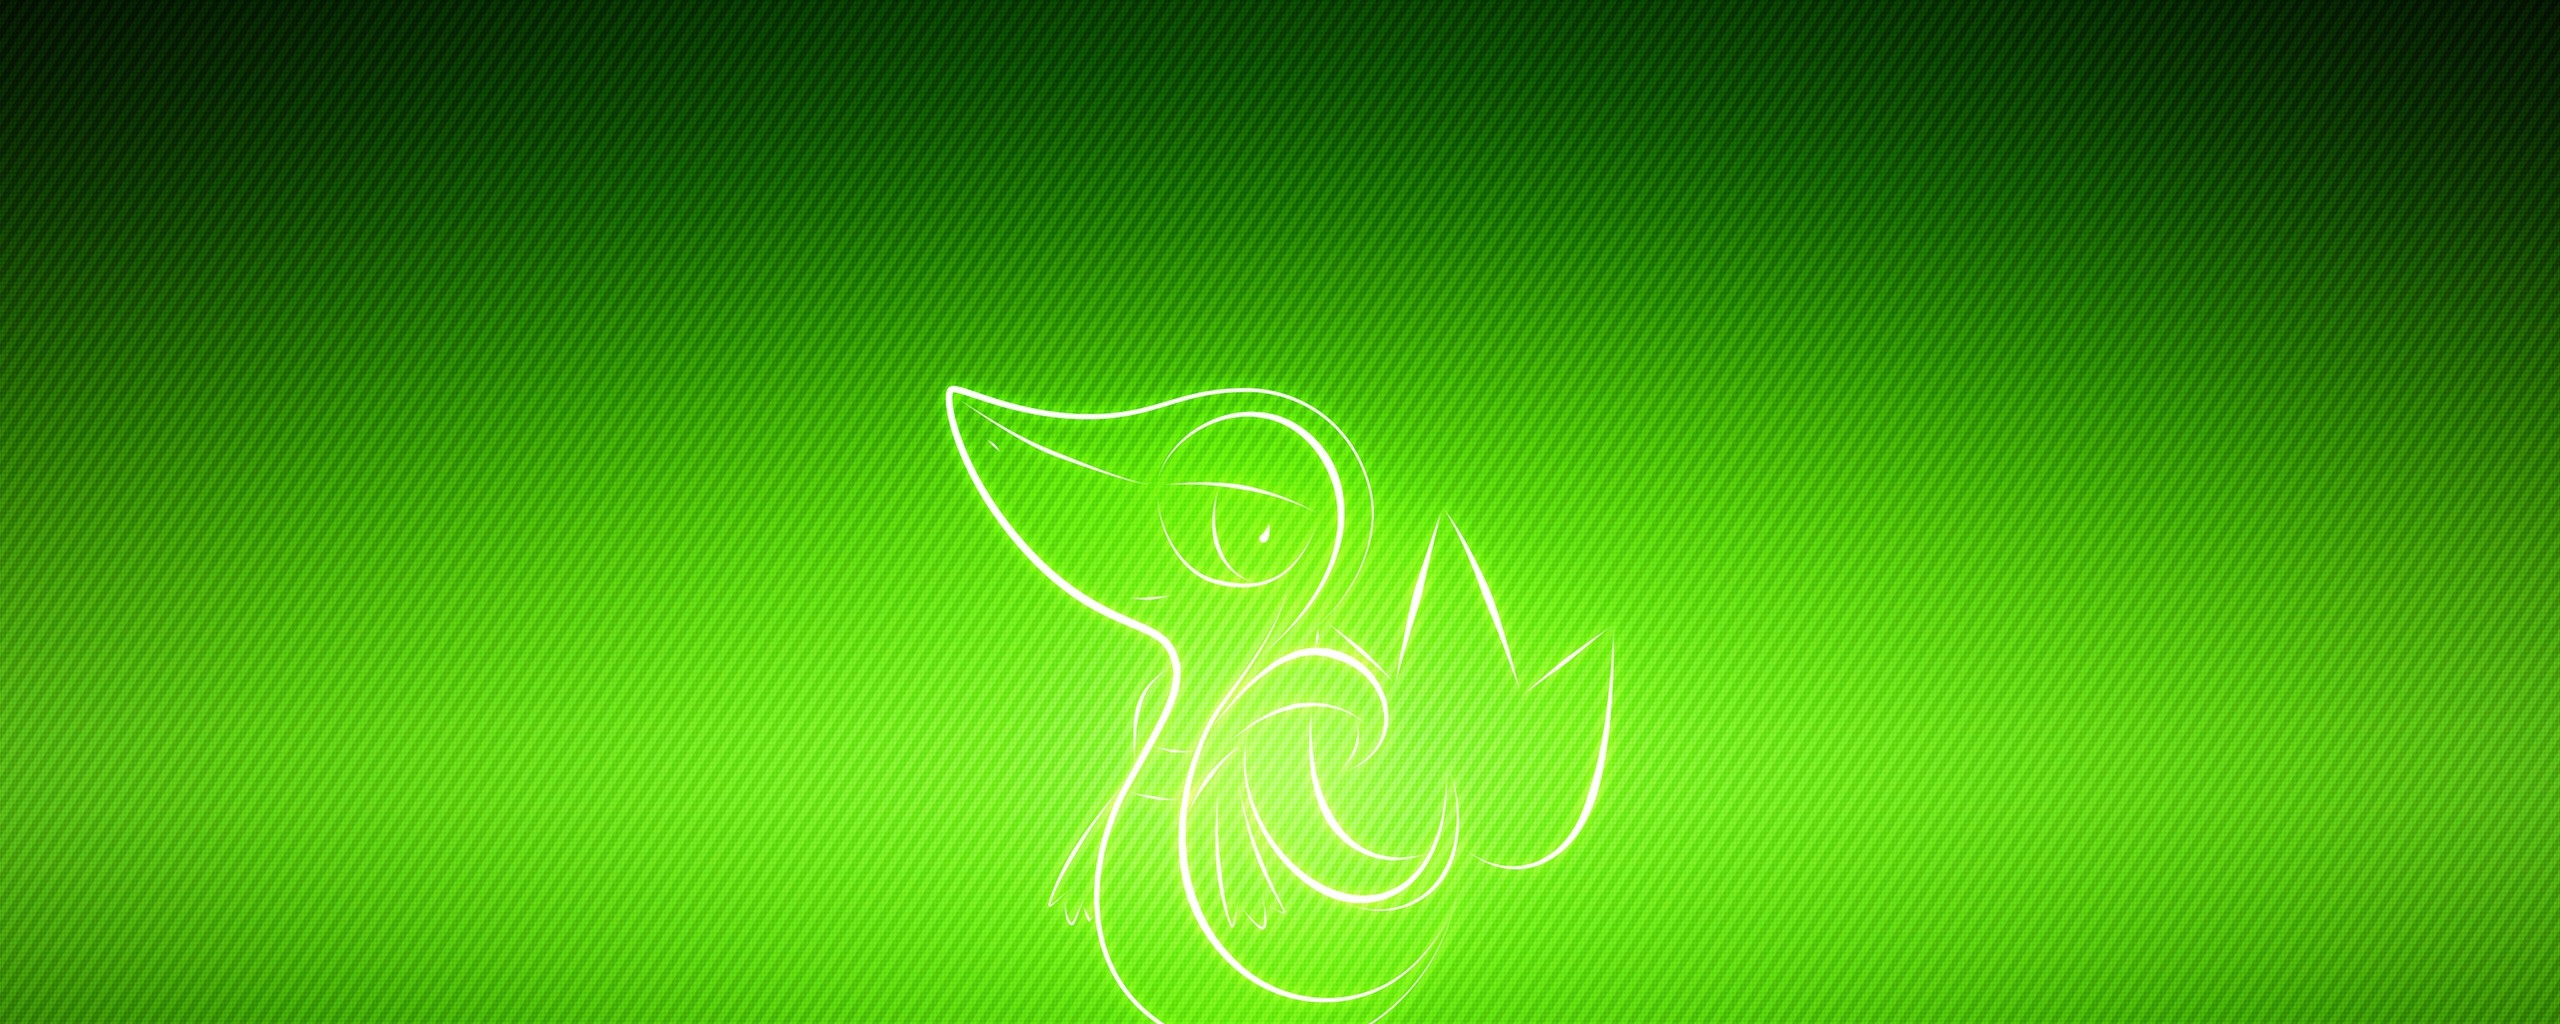  Pokemon Poultry Snivy Wallpaper Background Dual Monitor Resolution 2560x1024